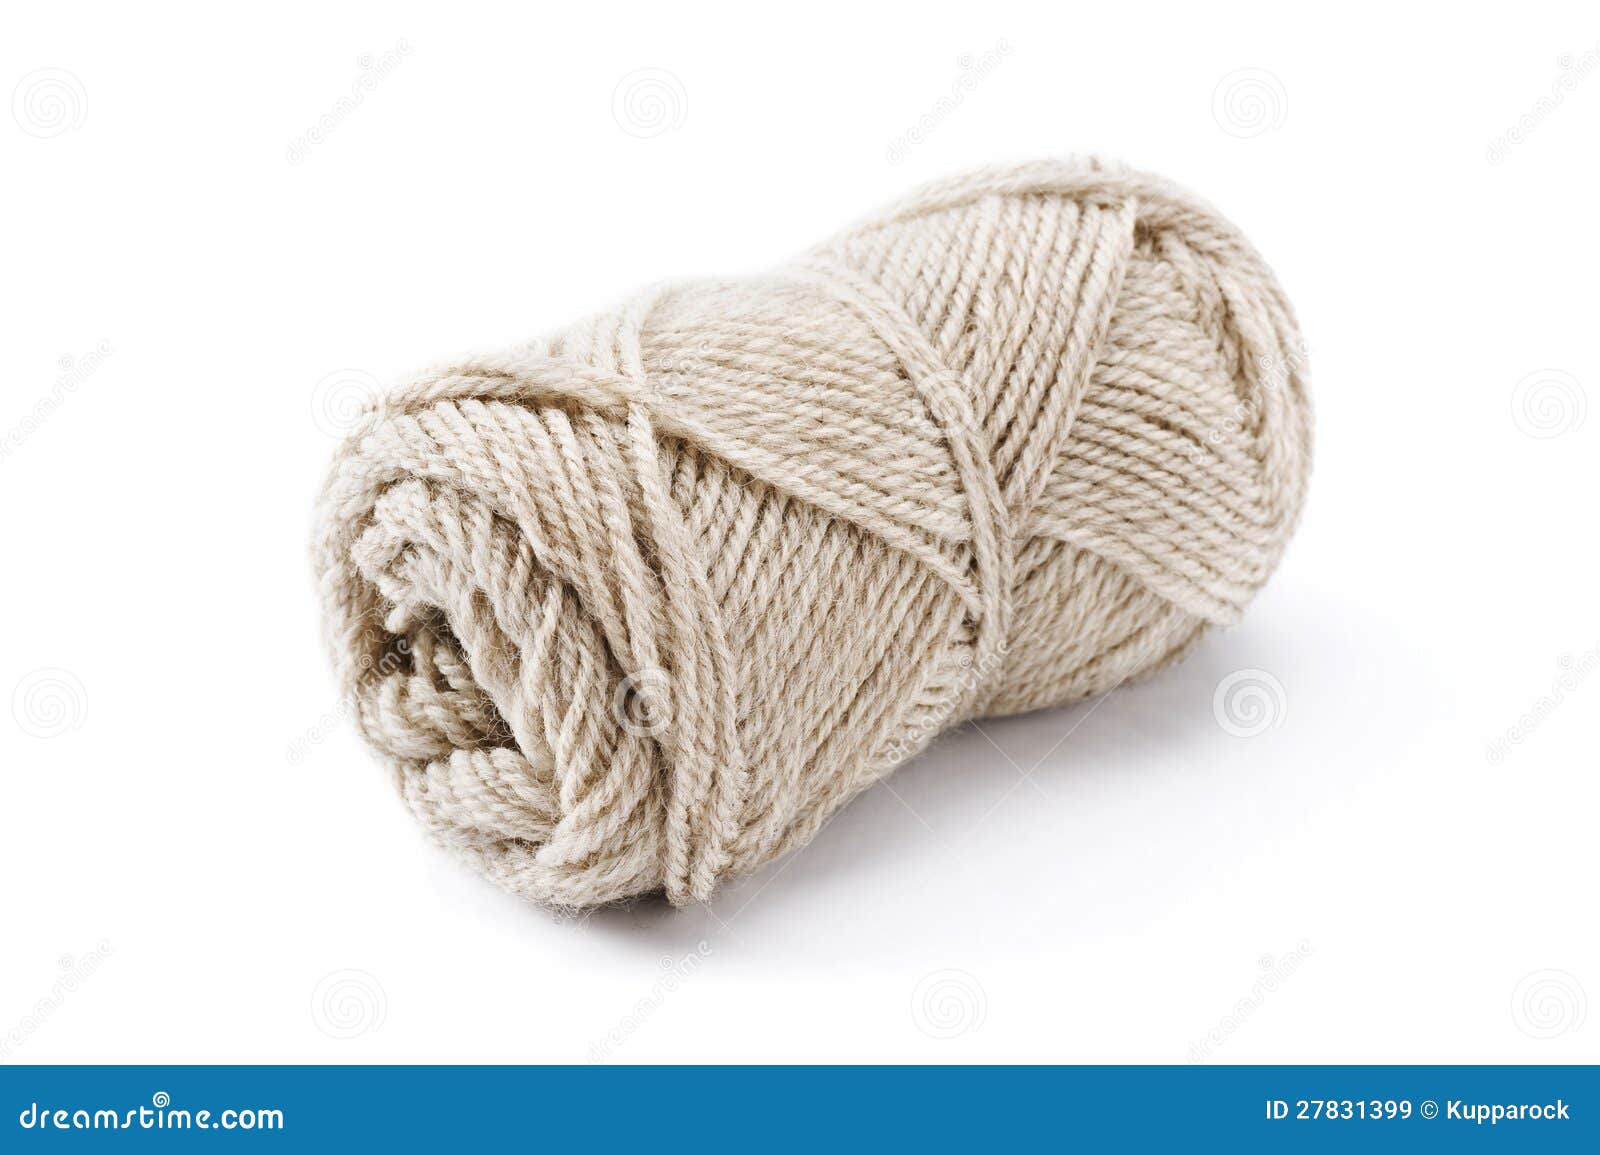 Ball of beige yarn stock image. Image of soft, knit, homemade - 27831399